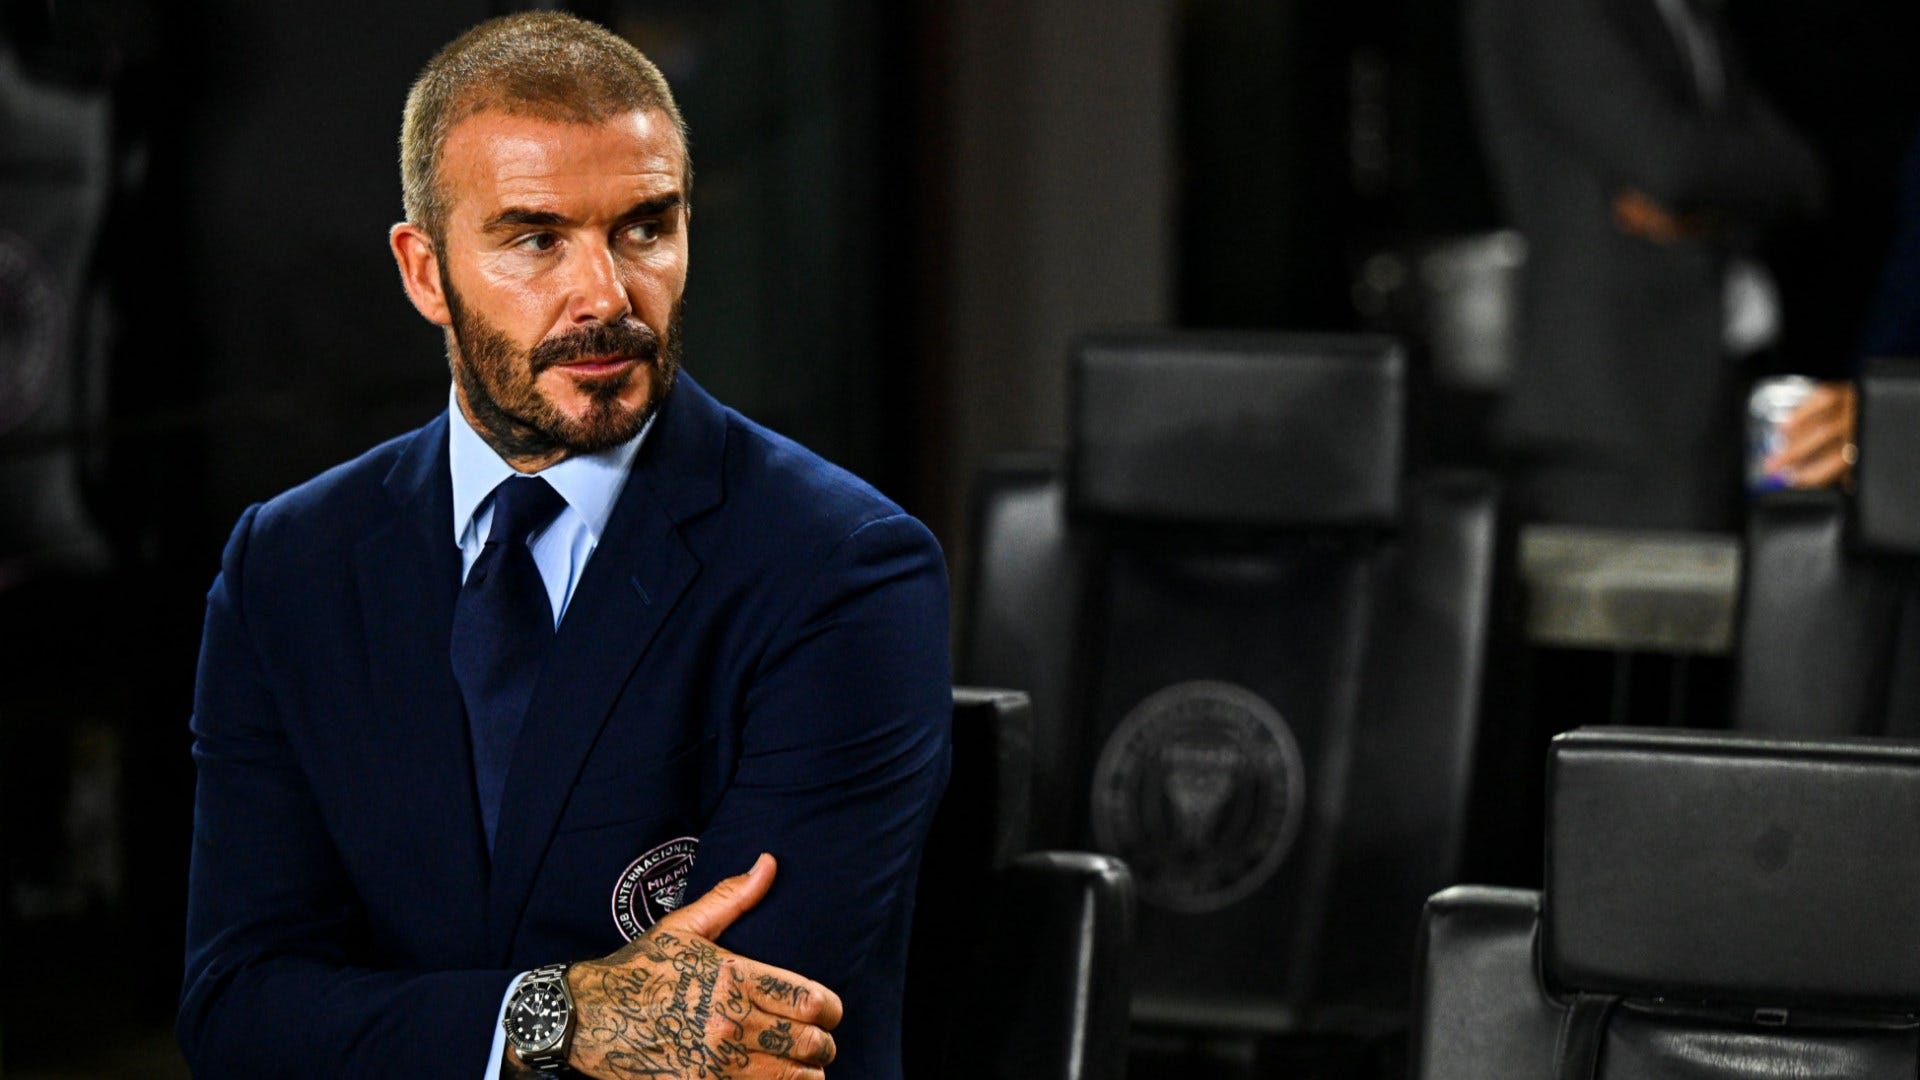 'I knew there'd be questions' - David Beckham launches defence of $150m partnership with Qatar amid criticism from LGBTQ+ groups